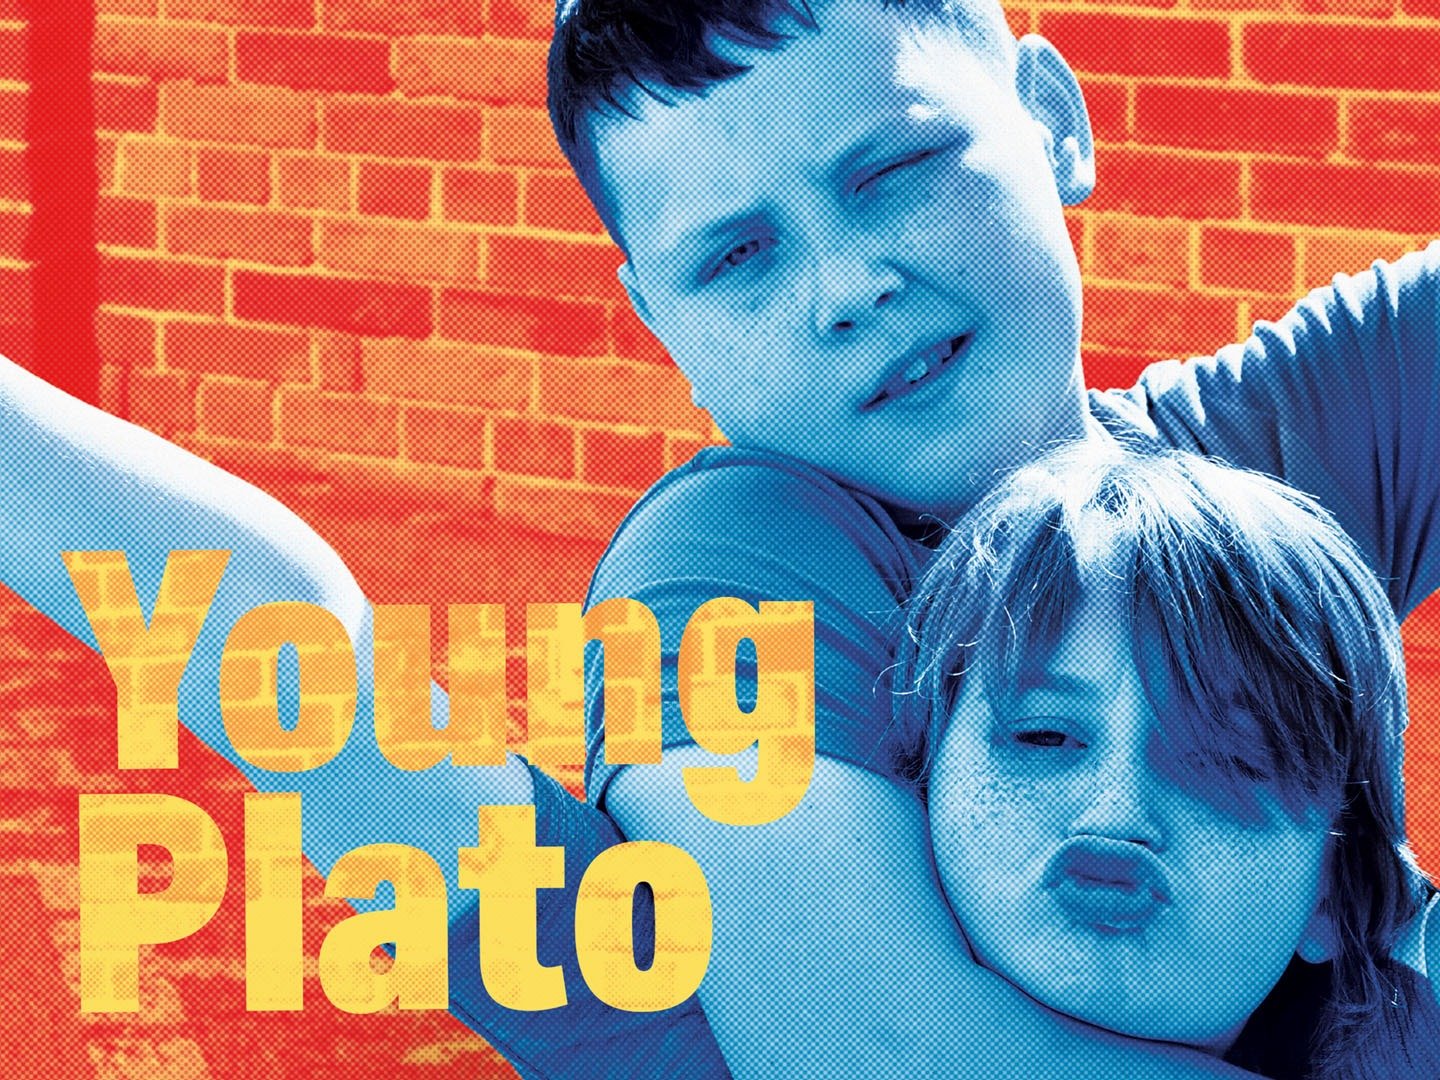 young plato movie review